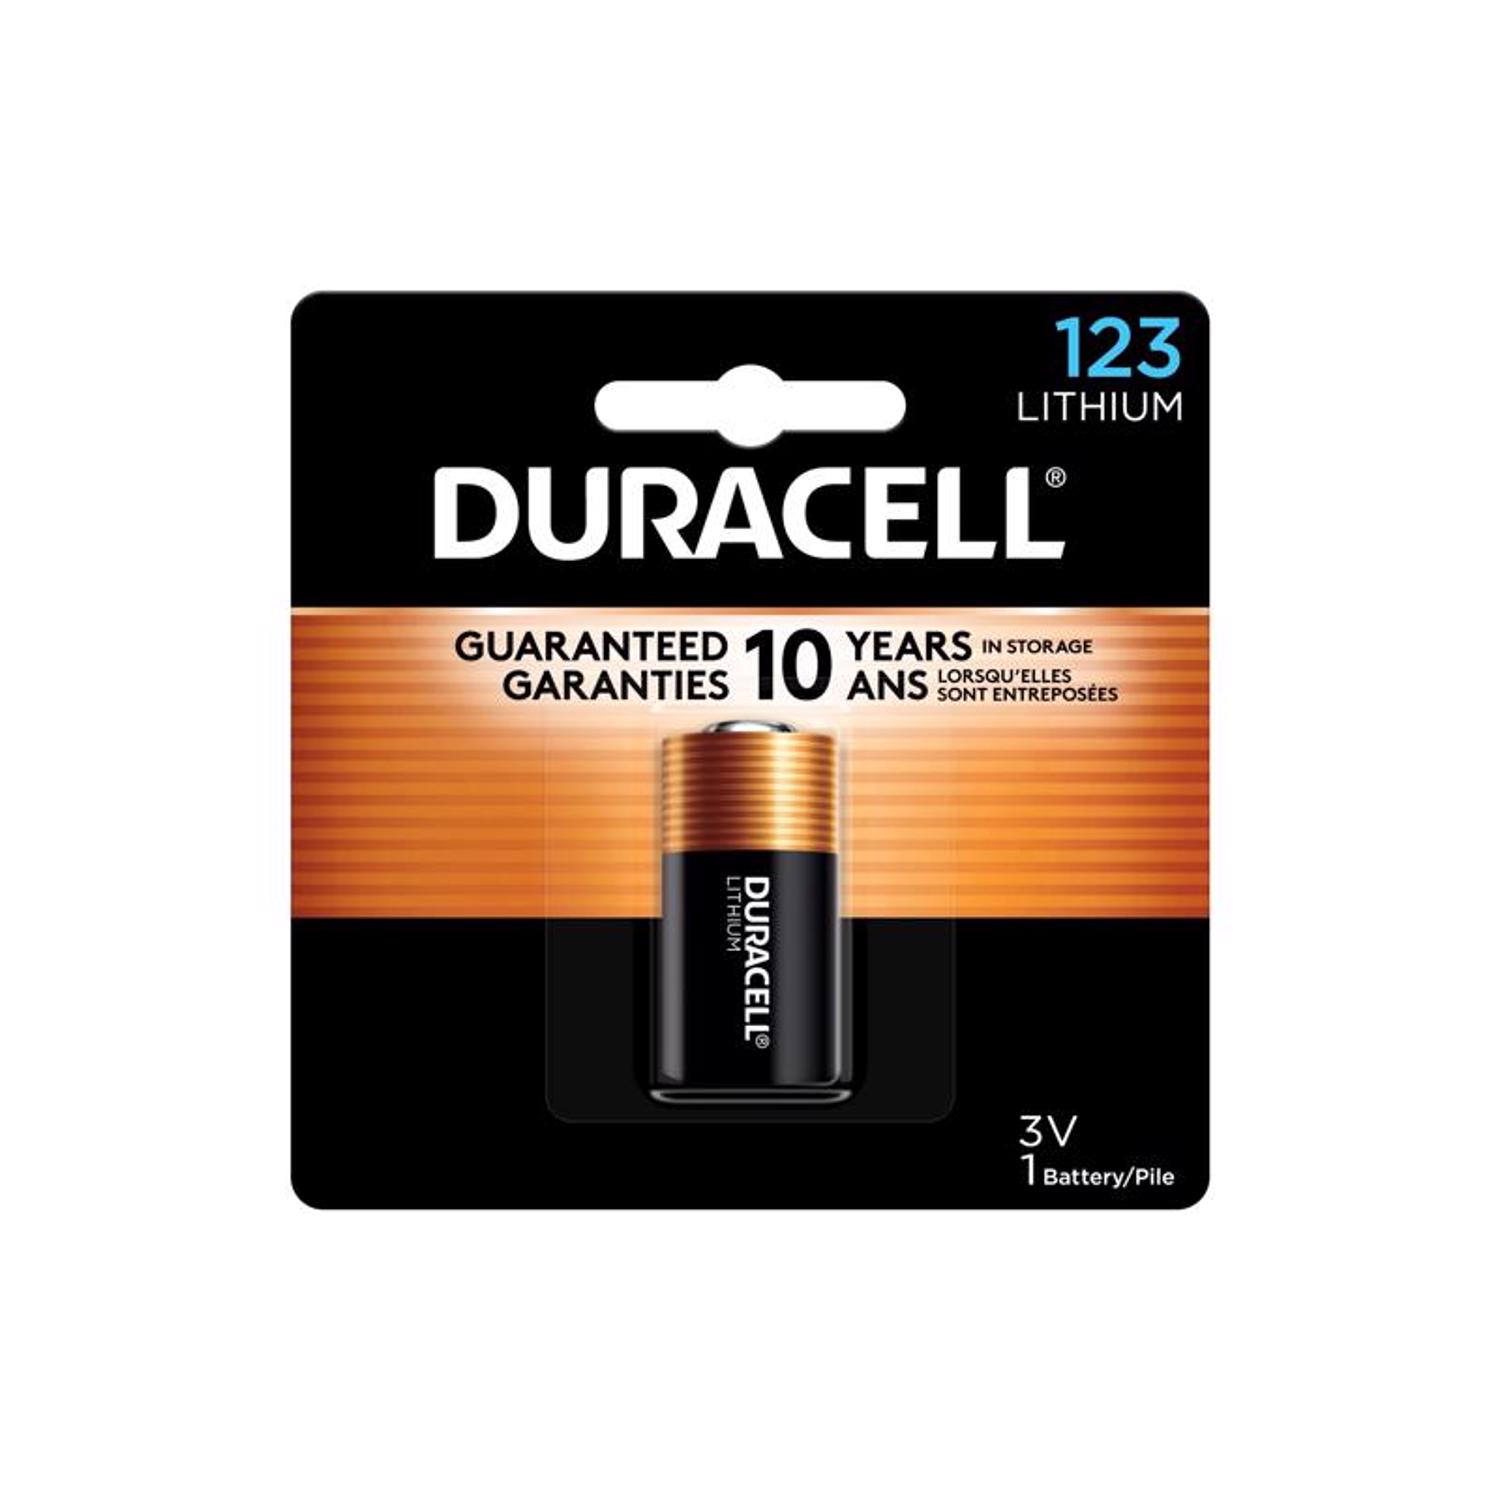 TIL that Duracell 2032 batteries have to be sanded down to work in AirTags  : r/batteries